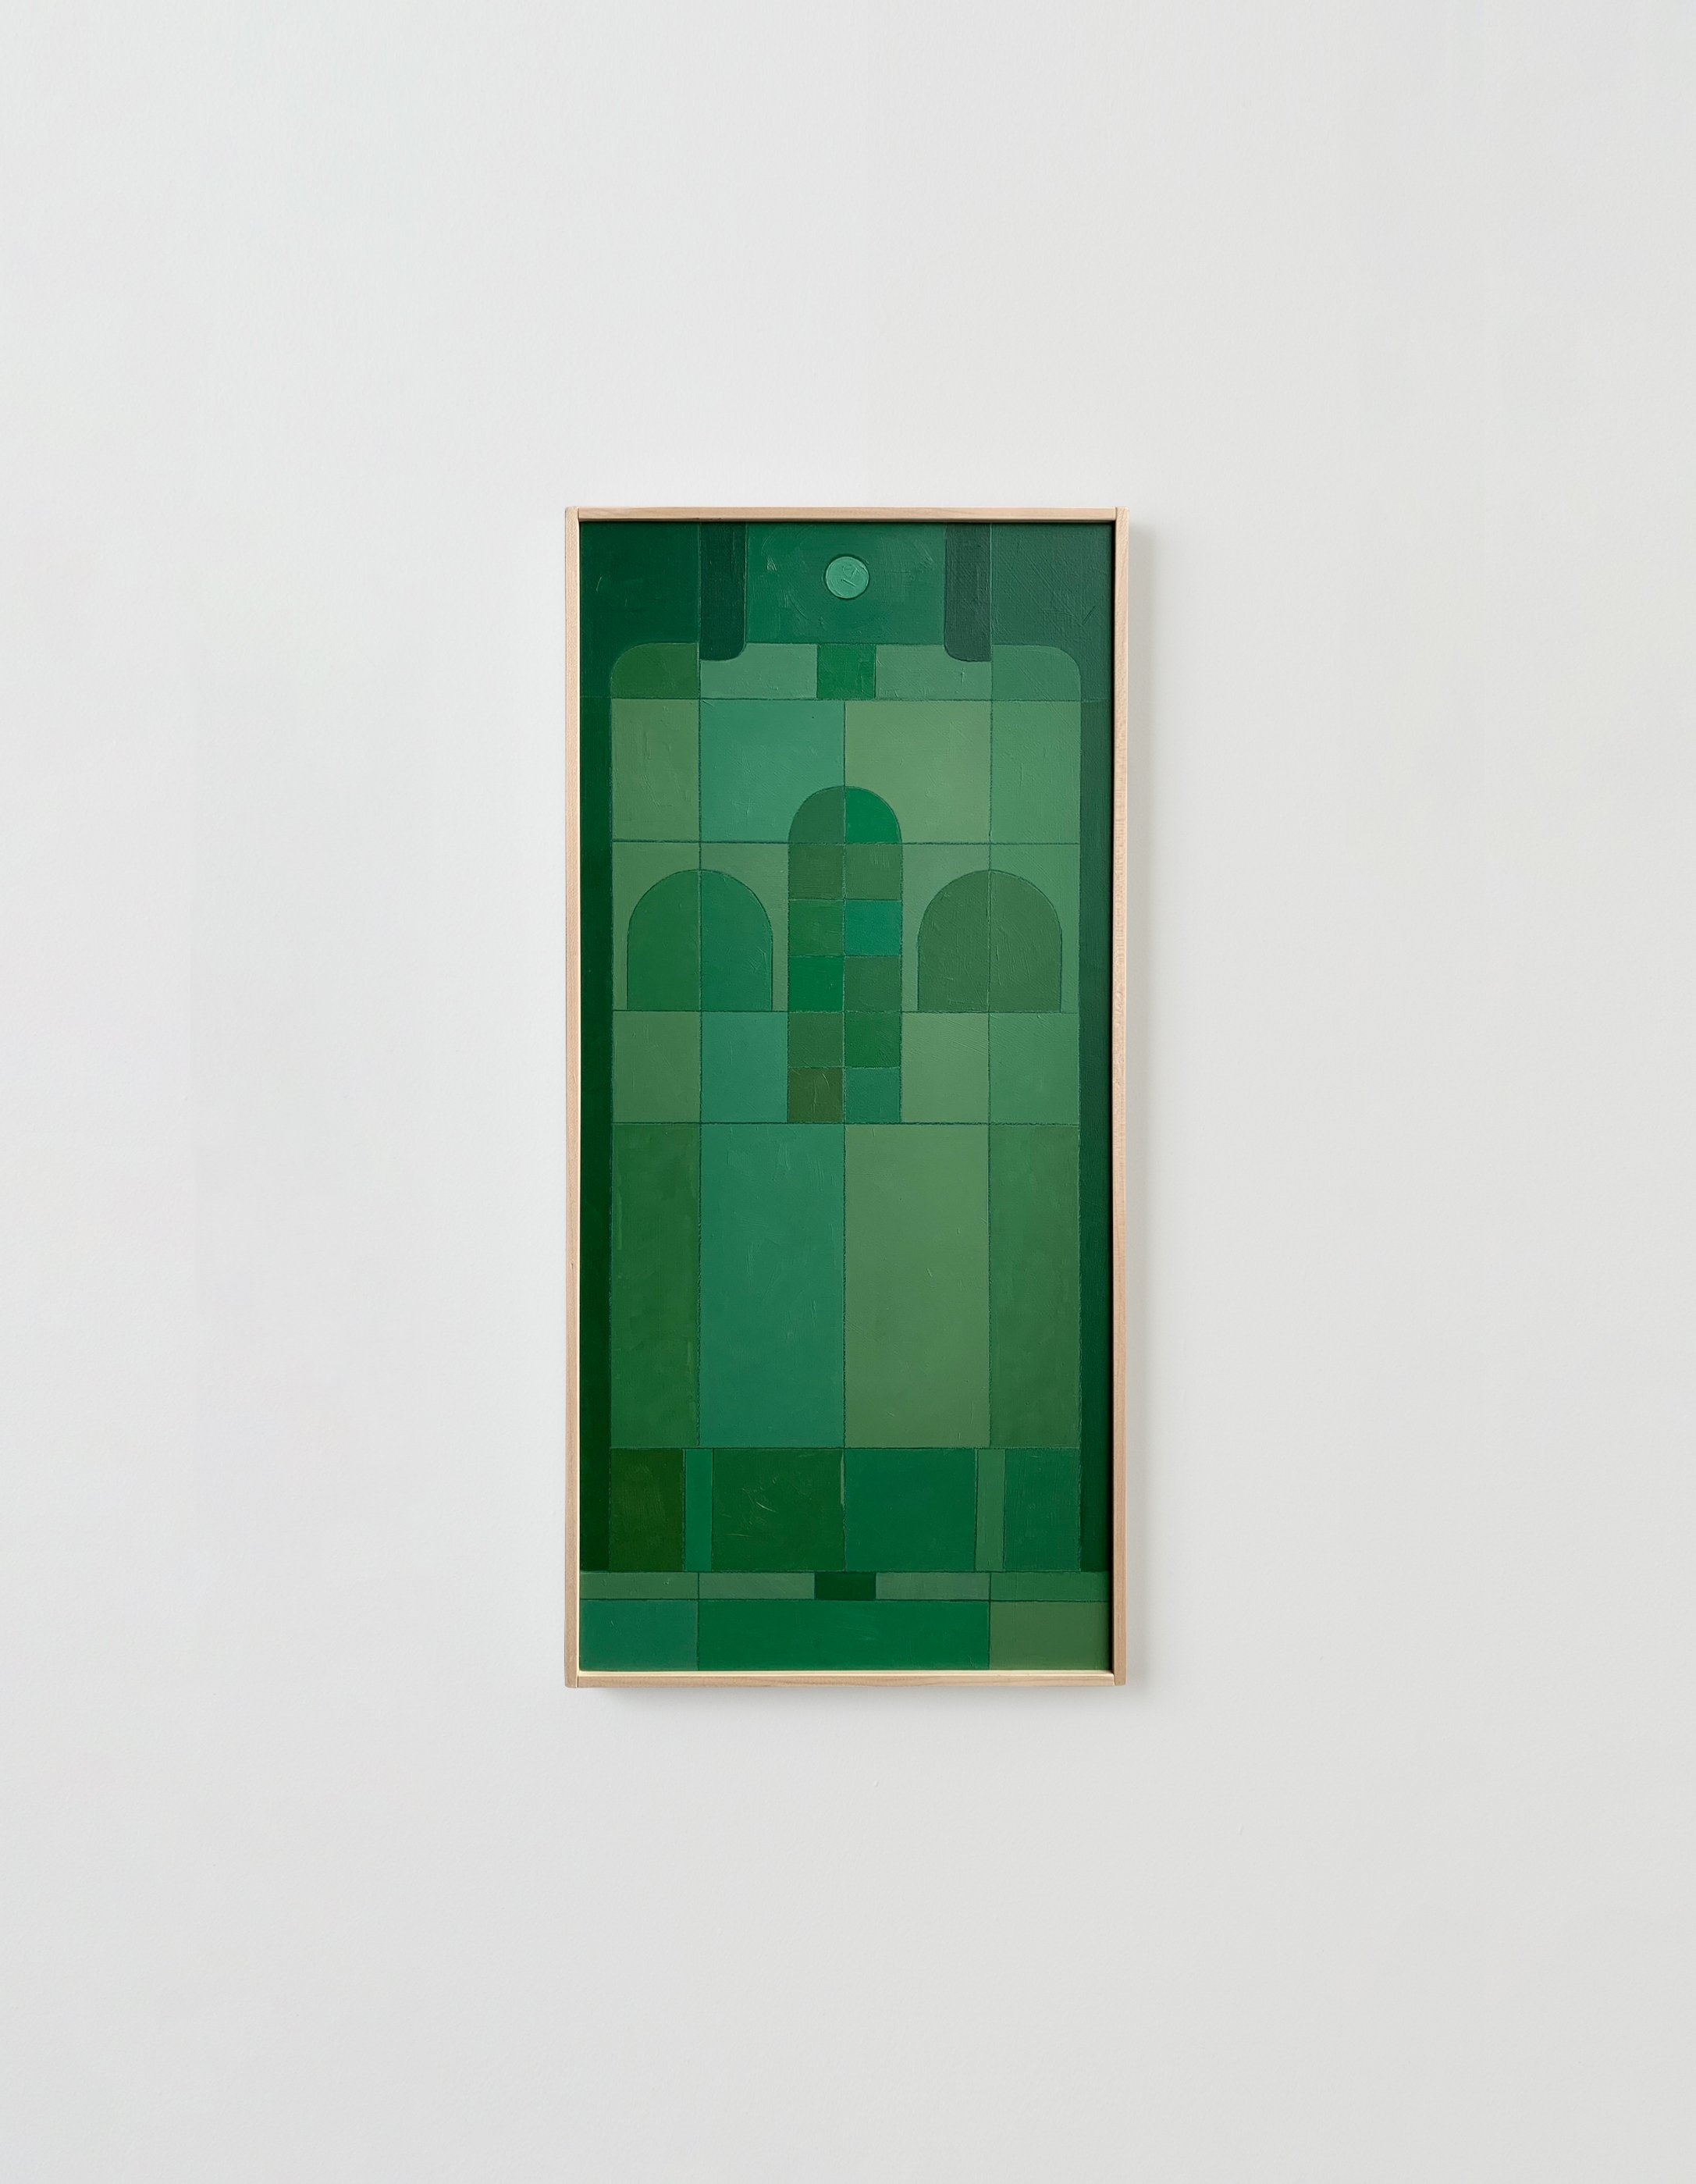 Carla-Weeks-Stained-Glass-Study-in-Green-9-context.jpg